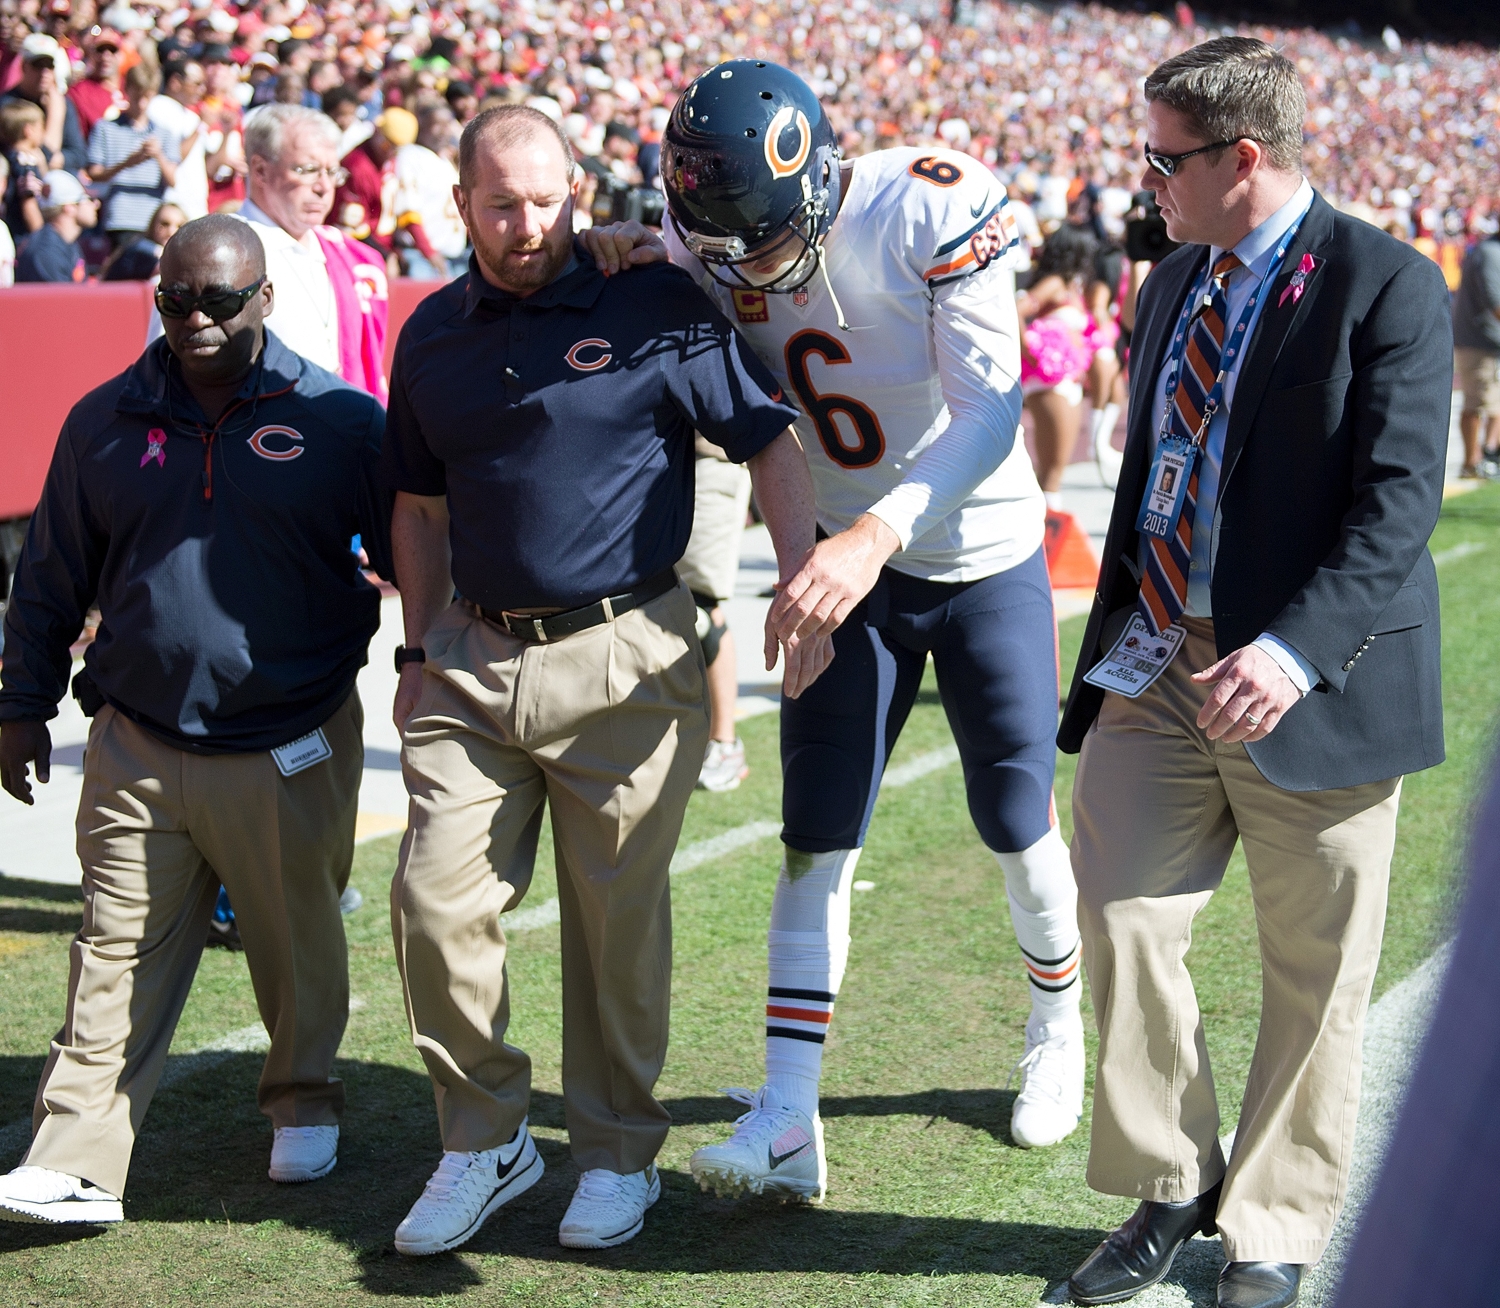 Medical staff assist Chicago Bears quarterback Jay Cutler with leaving the field.